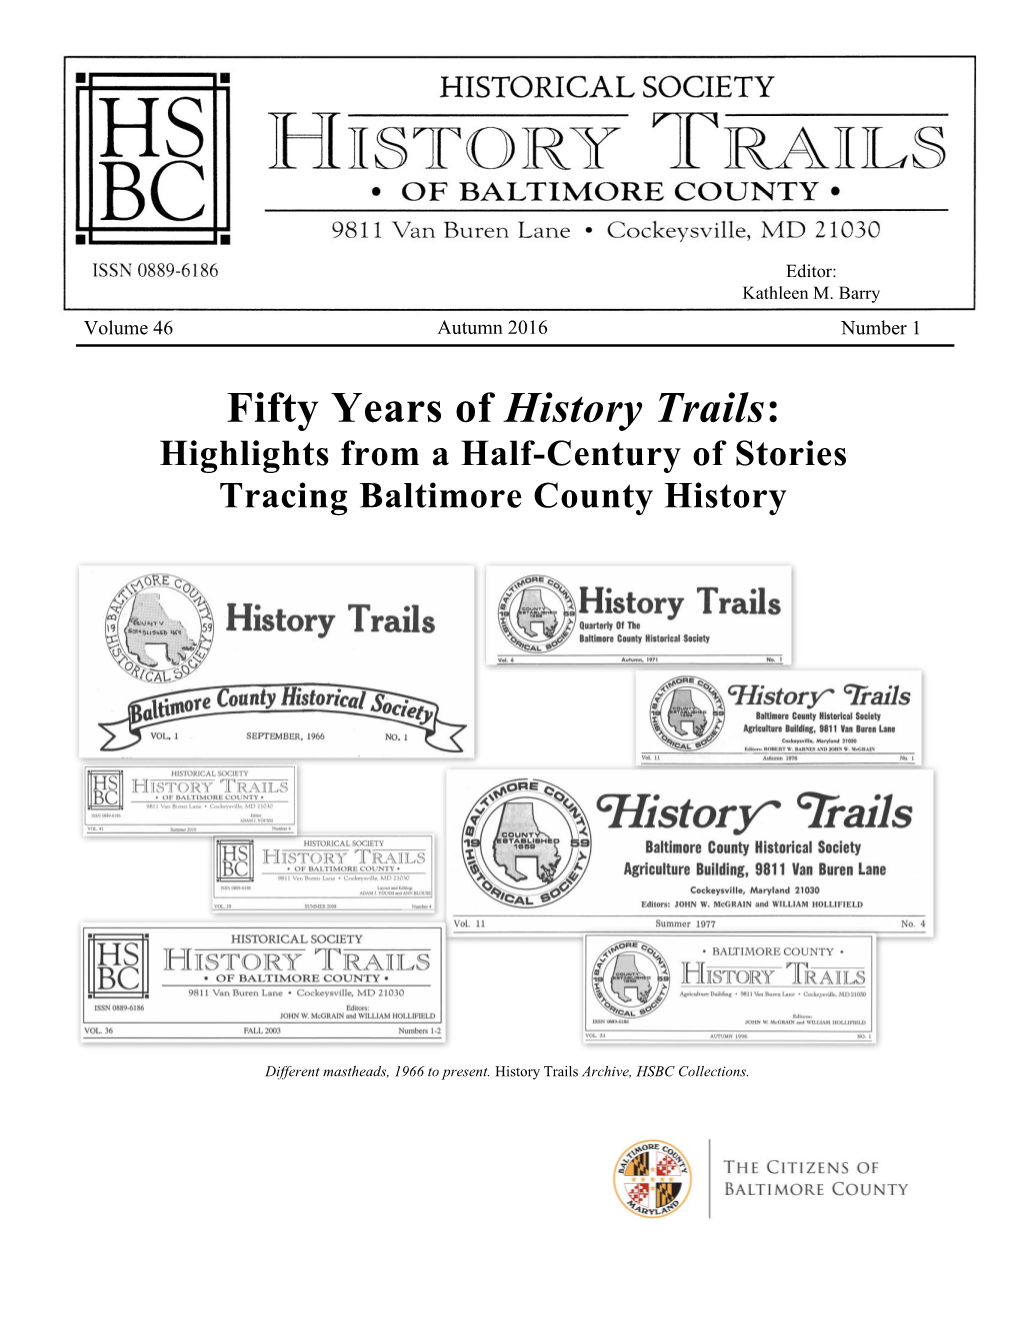 Fifty Years of History Trails: Highlights from a Half-Century of Stories Tracing Baltimore County History